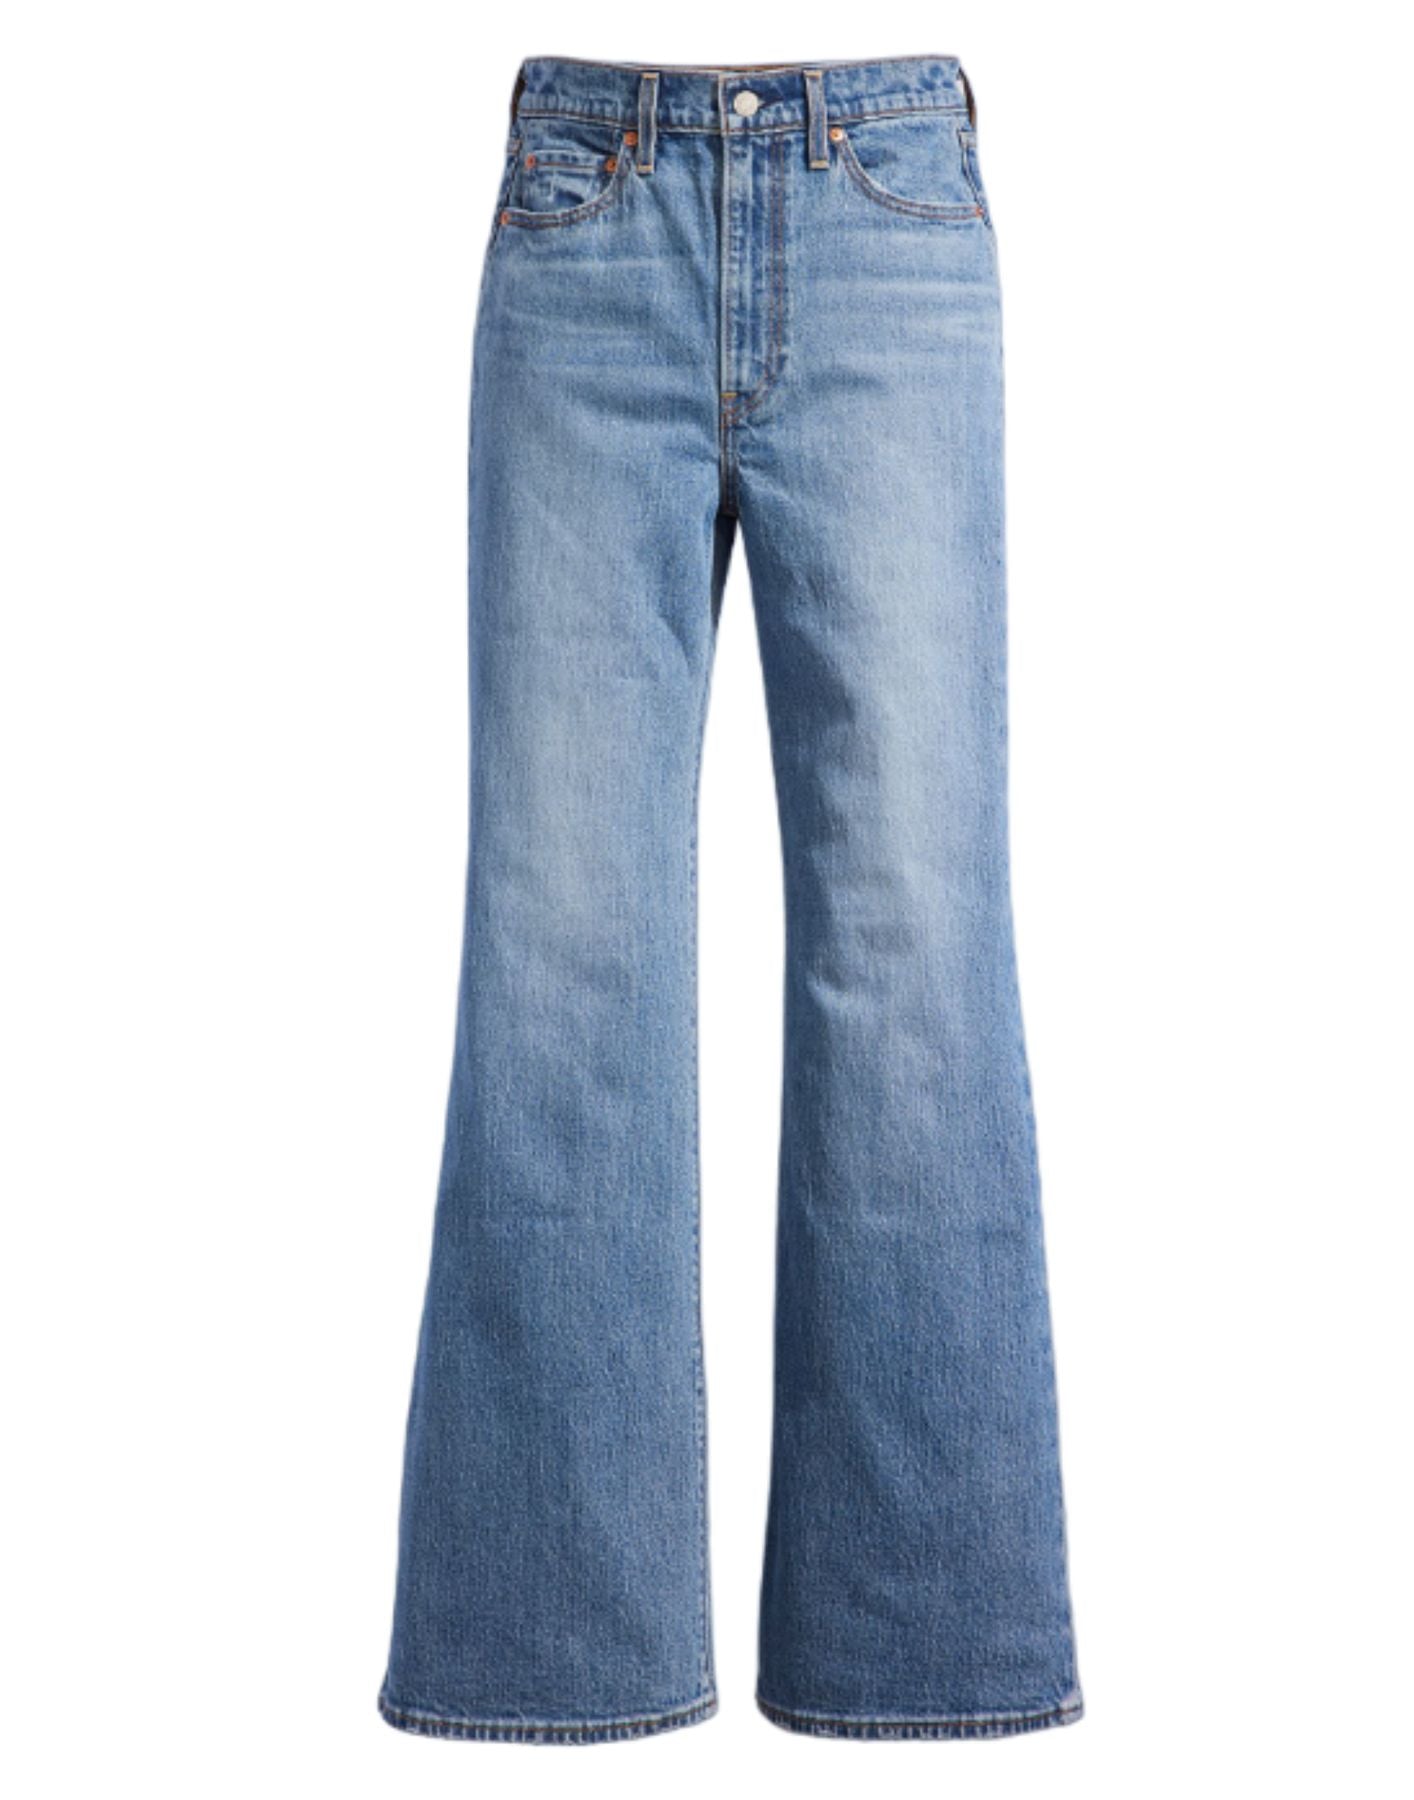 Jeans para mujer A75030009 Levi's